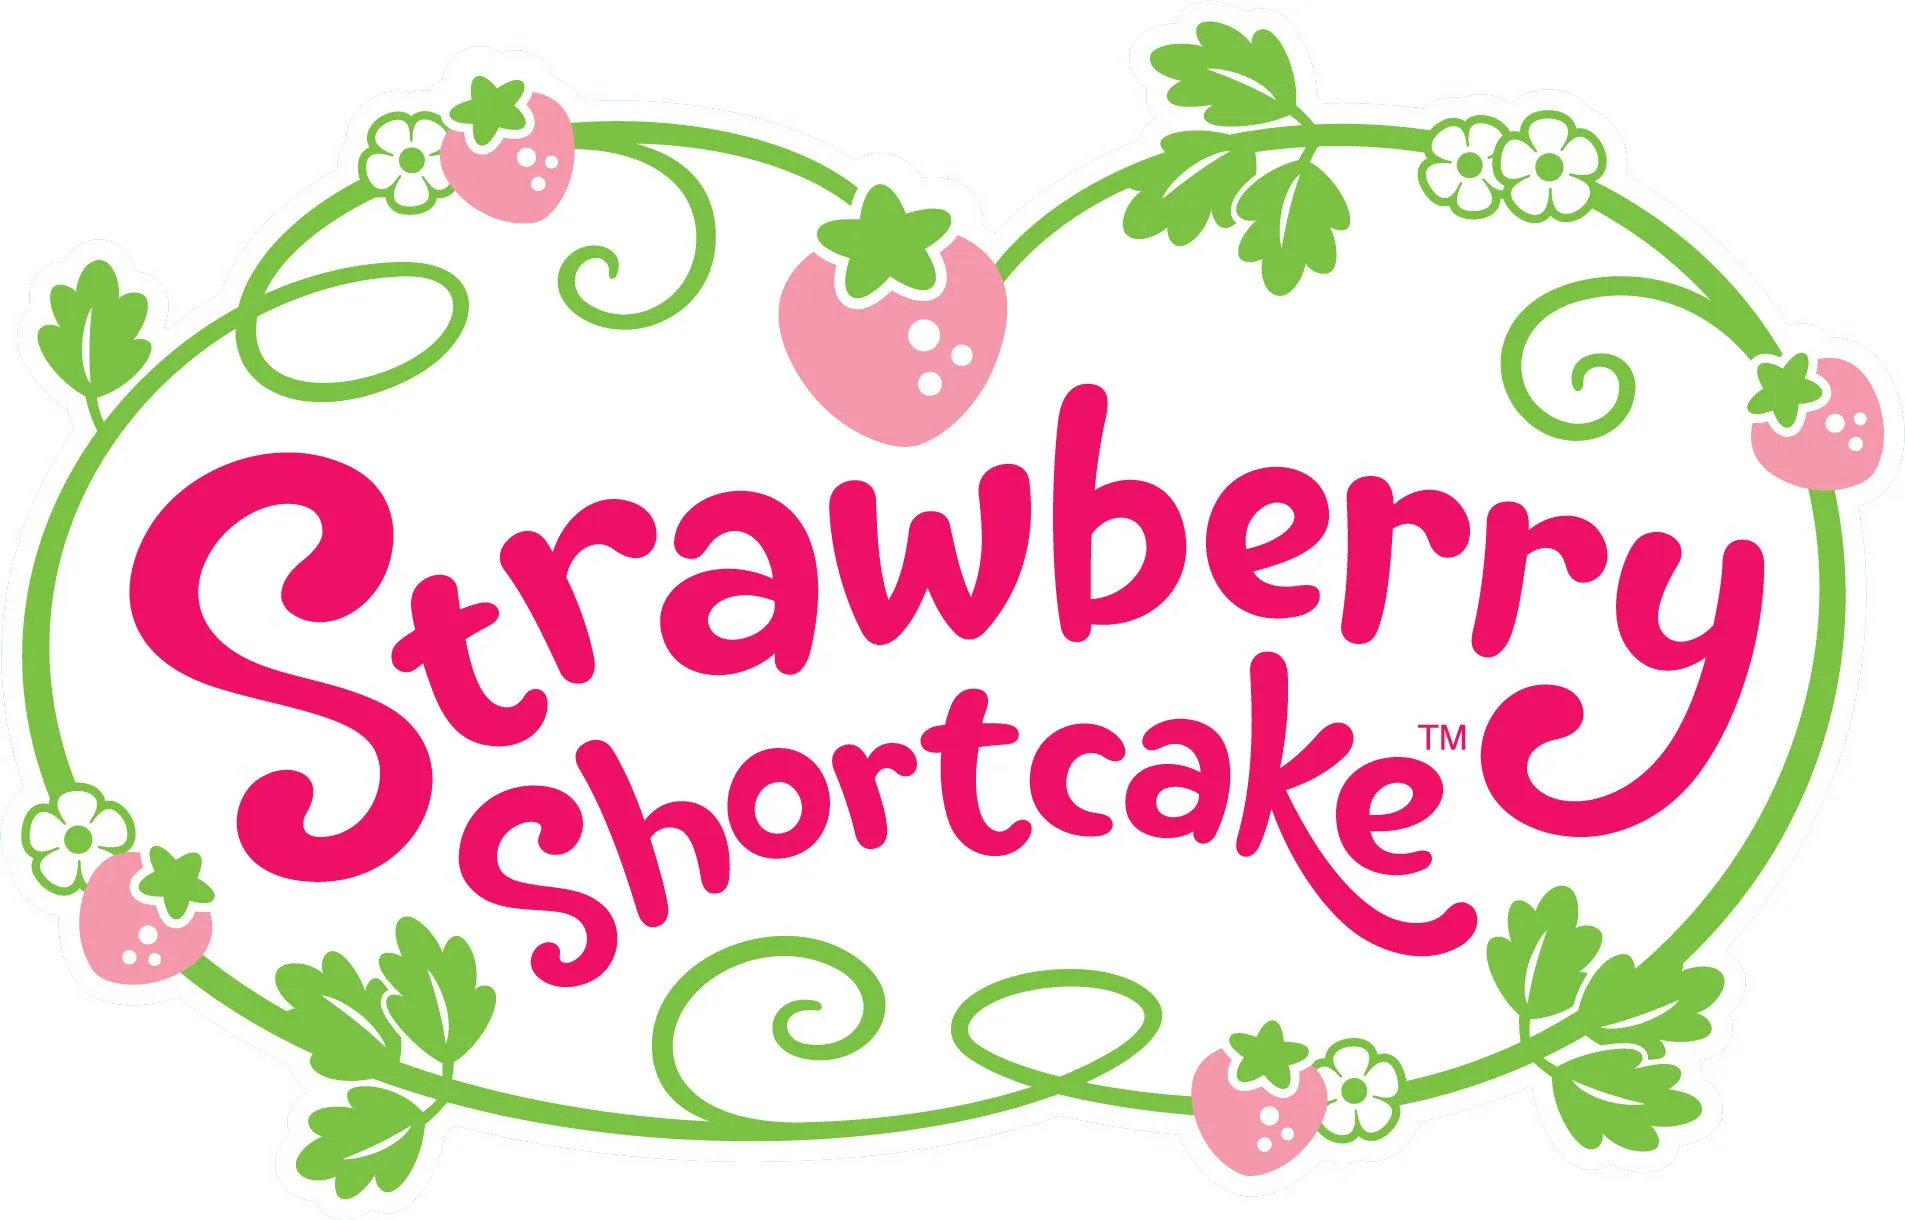 Strawberry Shortcake Logo Png Images & Pictures - Becuo